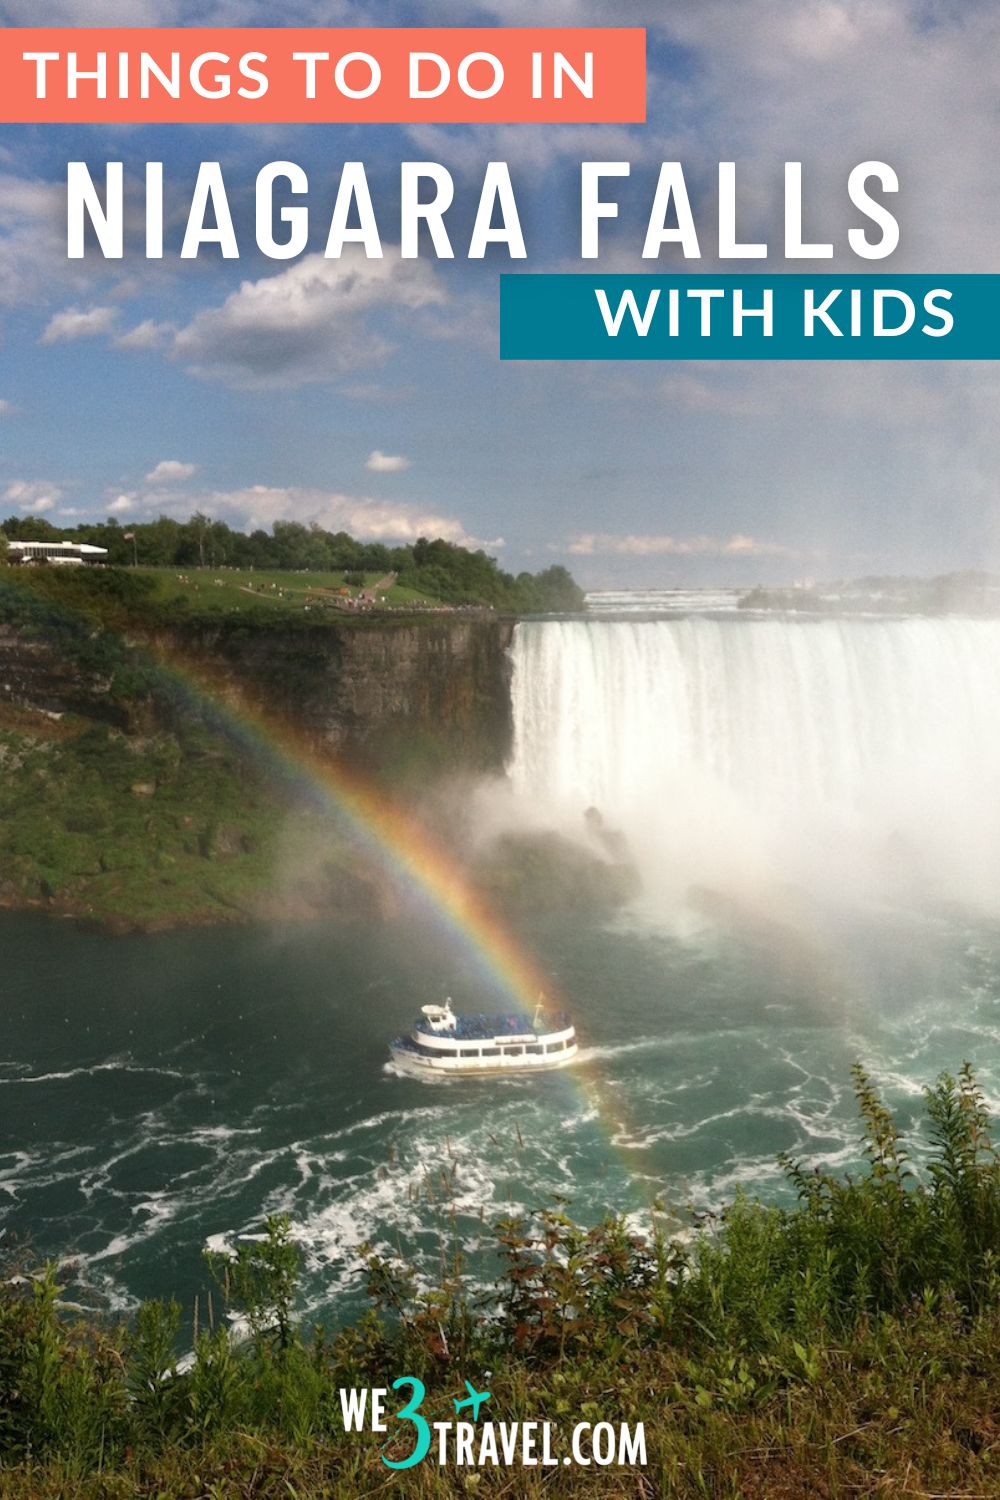 If you planning a family vacation to Niagara Falls, you will find some many fun attractions and things to do in Niagara Falls with kids. This guide breaks down the benefits of the Canadian vs US side and what to do in each, plus where to stay in Niagara Falls with kids.